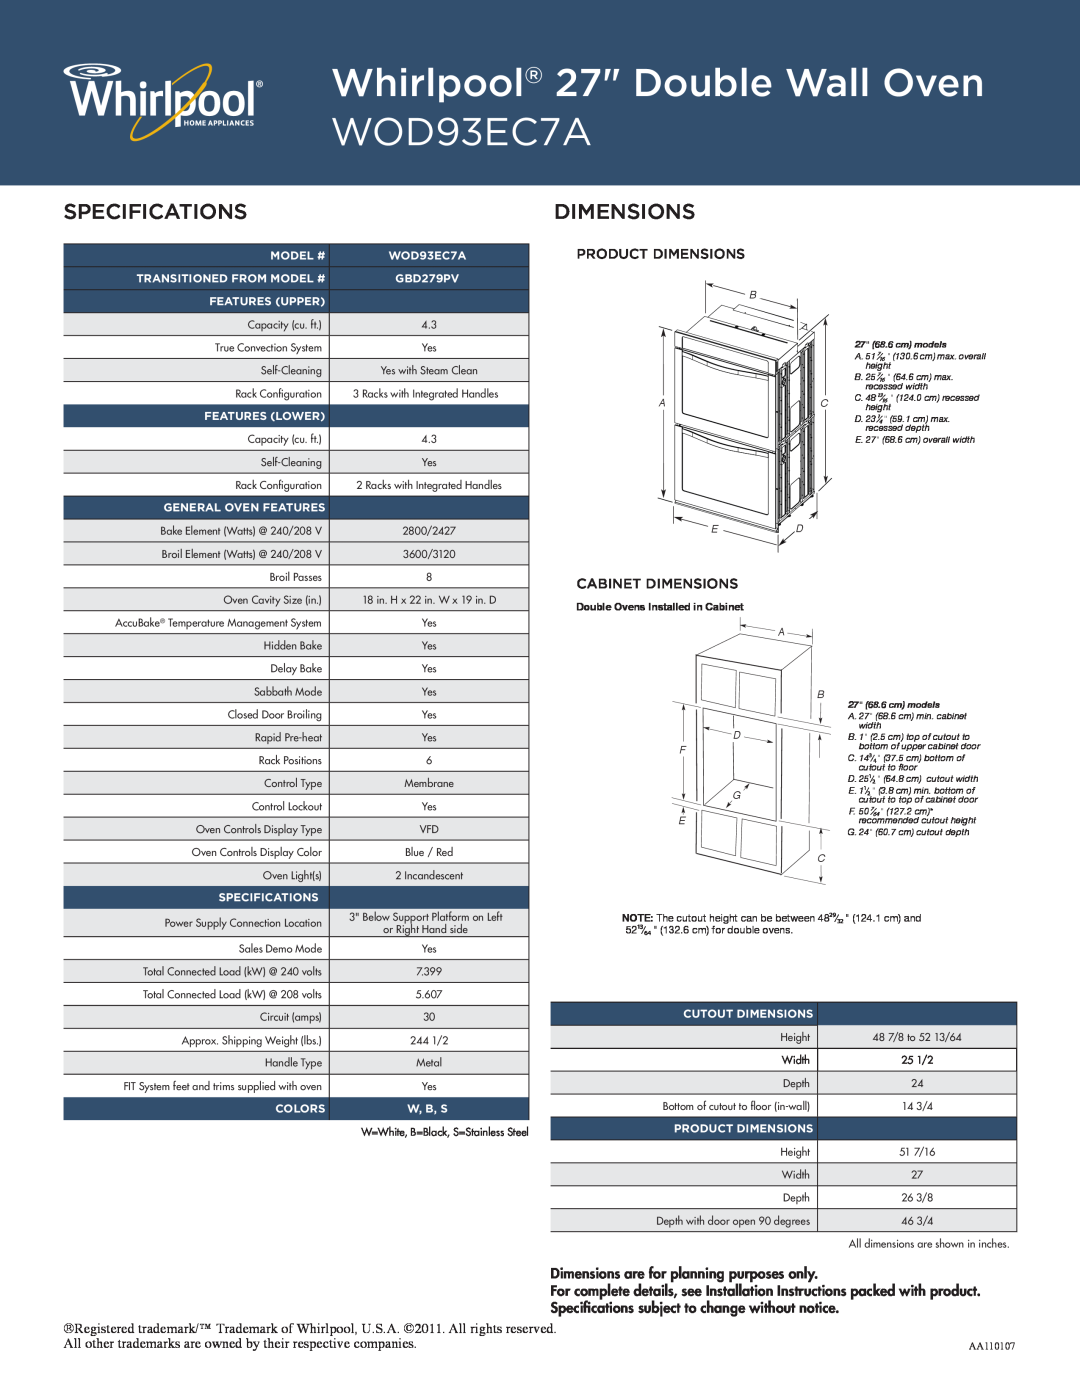 Whirlpool WOS51EC0A manual Product Dimensions, Cabinet Dimensions, Whirlpool 27 Double Wall Oven WOD93EC7A 